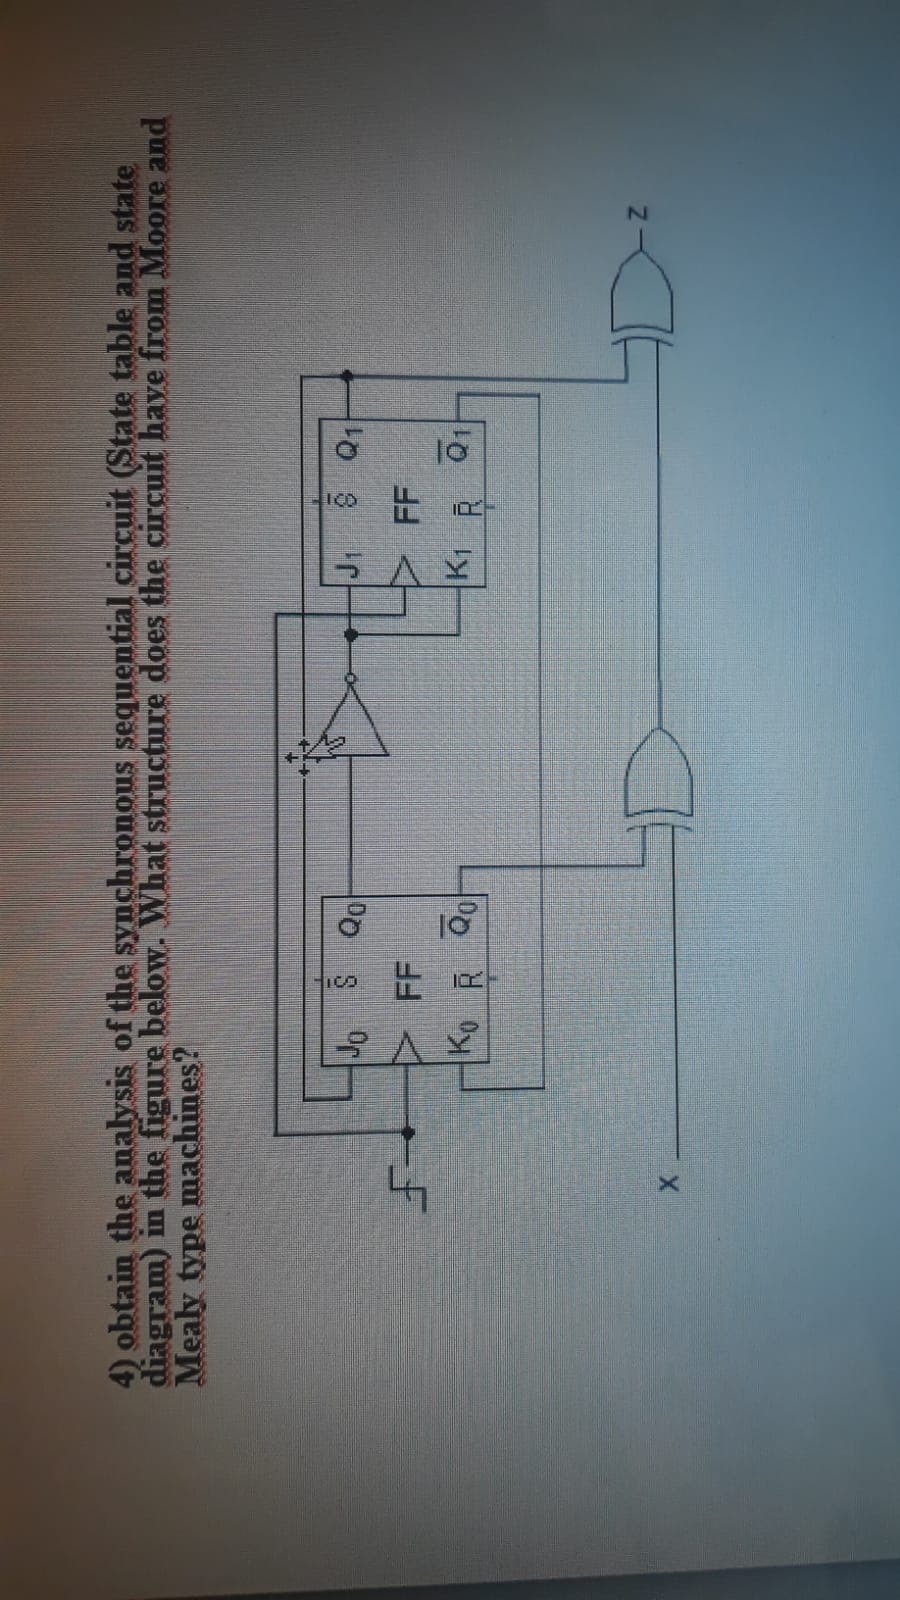 lo
4) obtain the analysis of the synchronous sequential circuit (State table and state
diagram) in the figure below. What structure does the circuit have from Moore and
Mealy type machines?
8 Q1
Or
FF
FF
4.
01
K1 R
